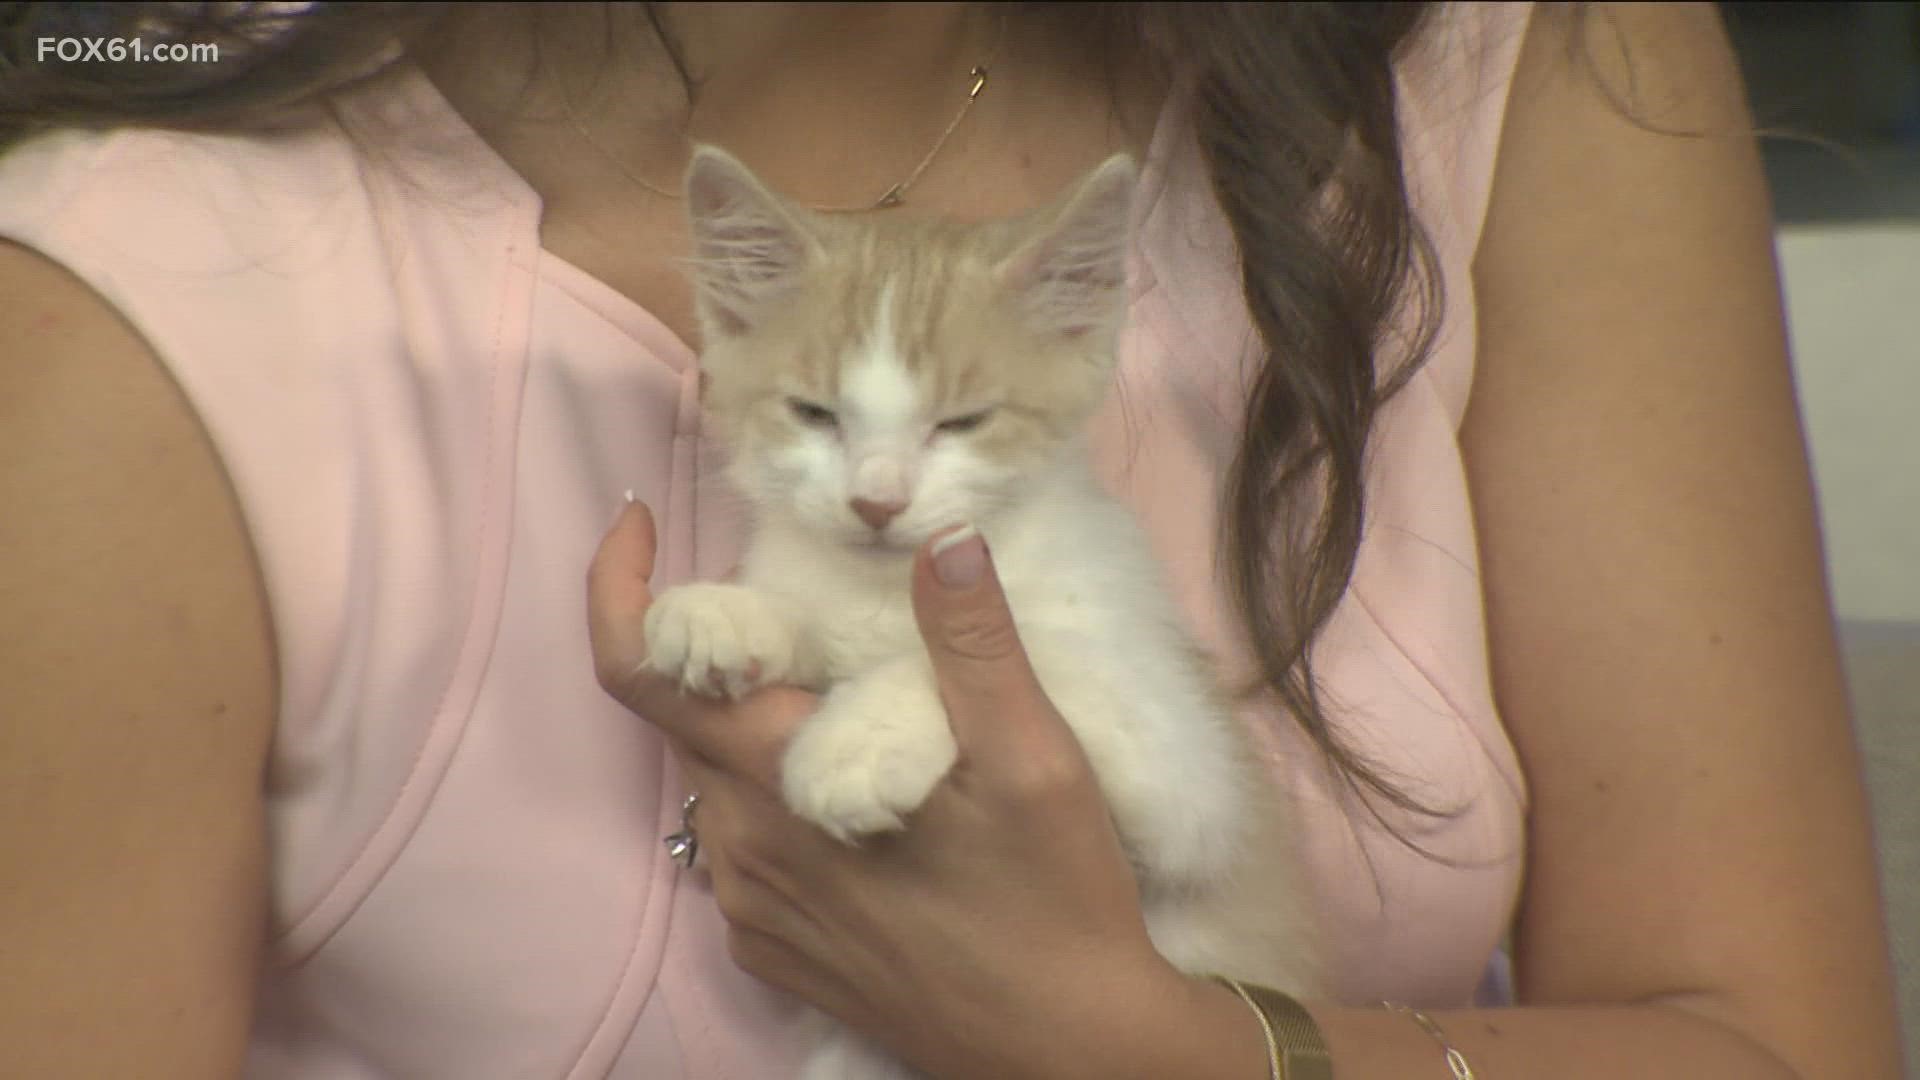 This week's Pet of the Week is available for adoption at CT Humane Society.